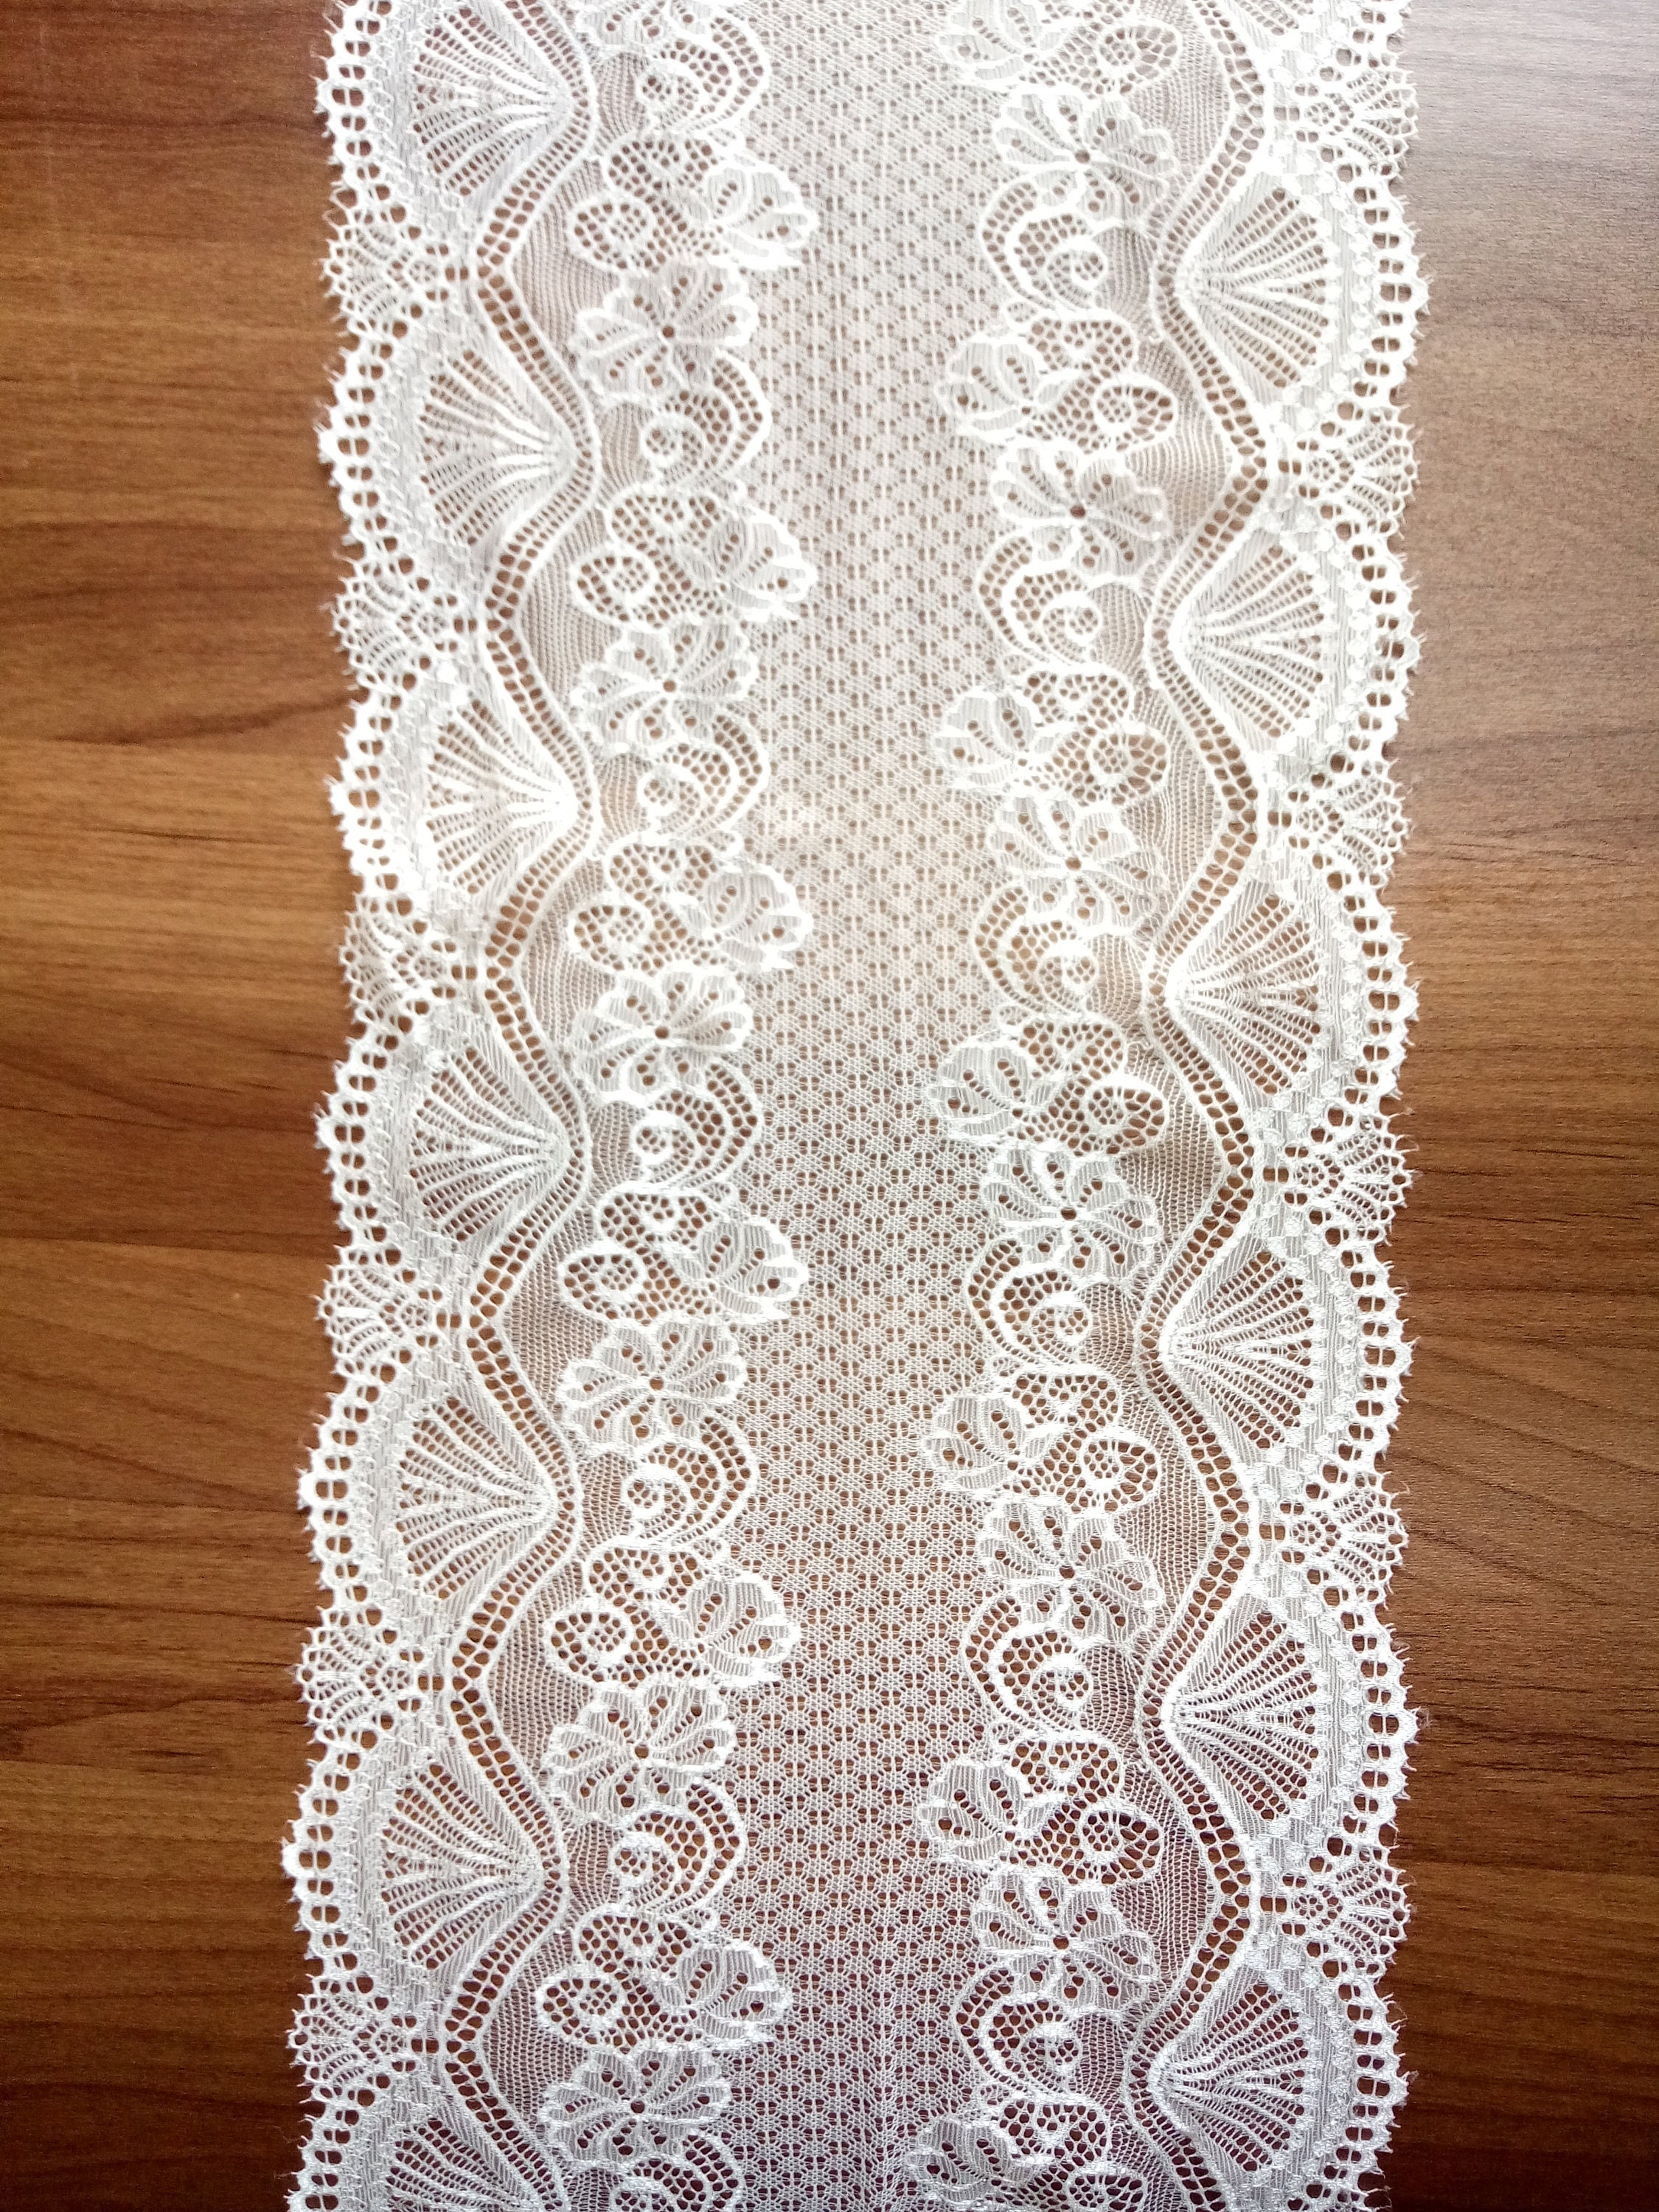 Ivory lace table runner 8 table runners holiday